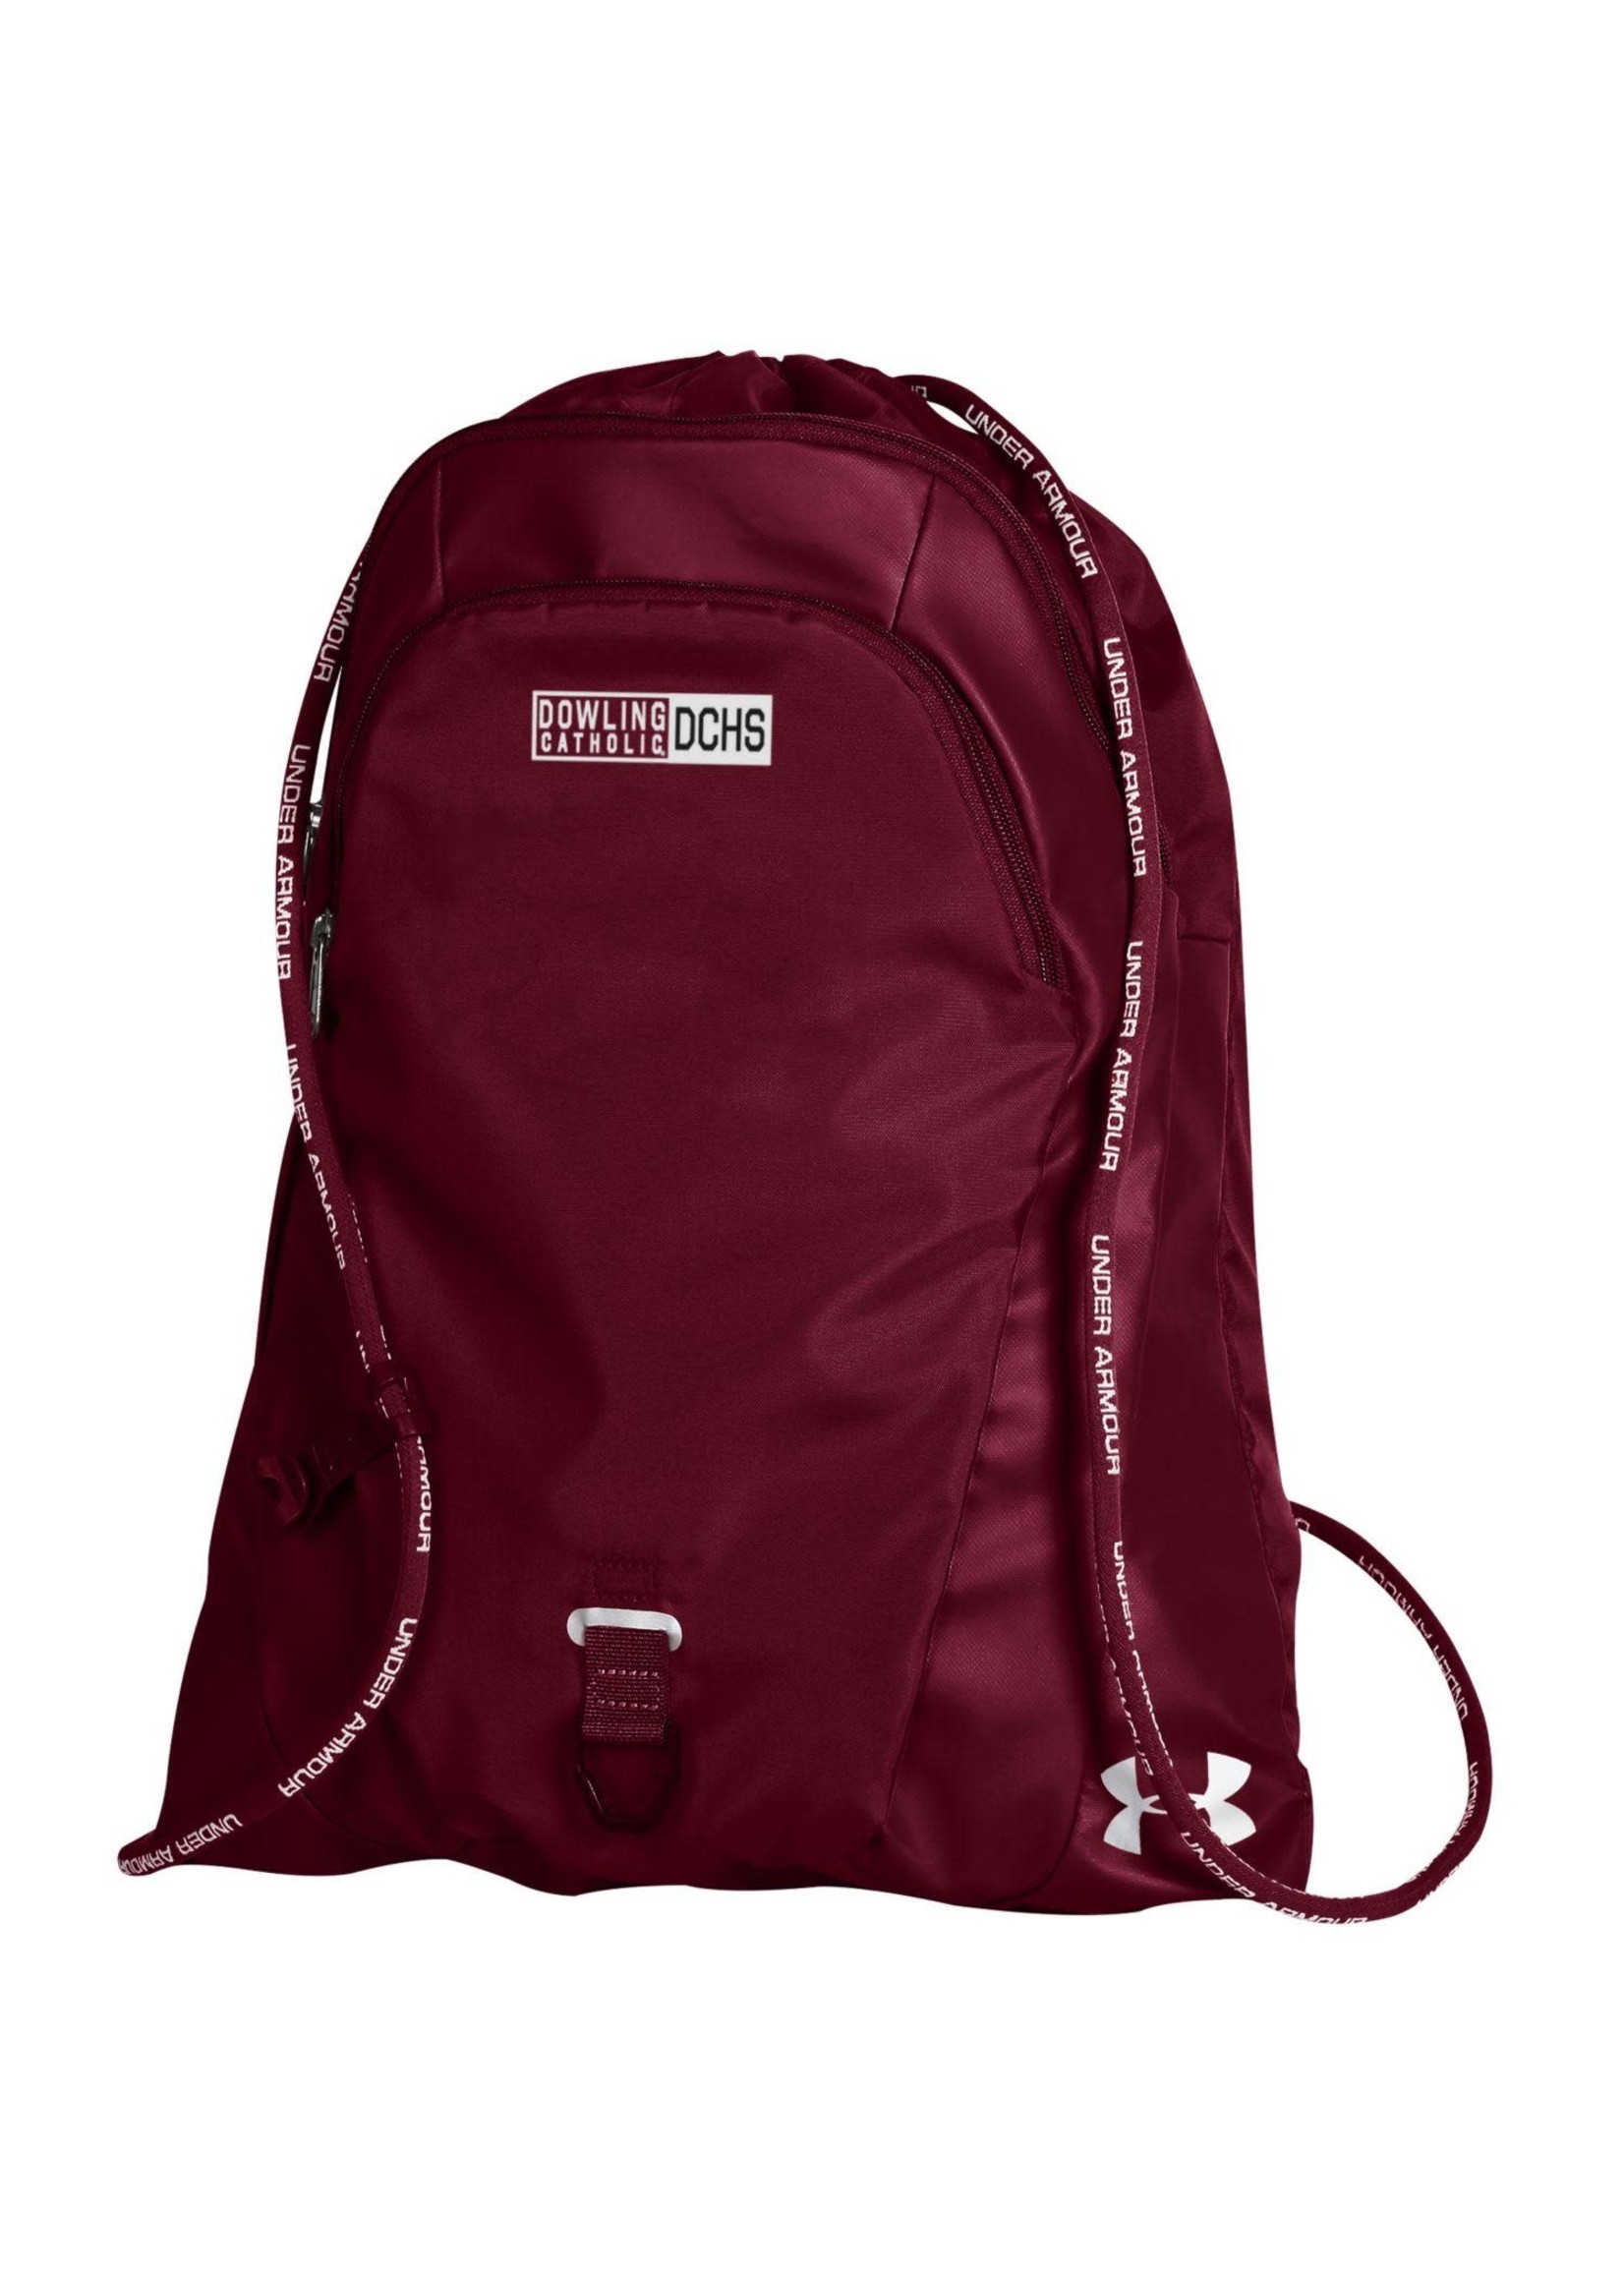 Under Armour unisex-adult Undeniable Sackpack